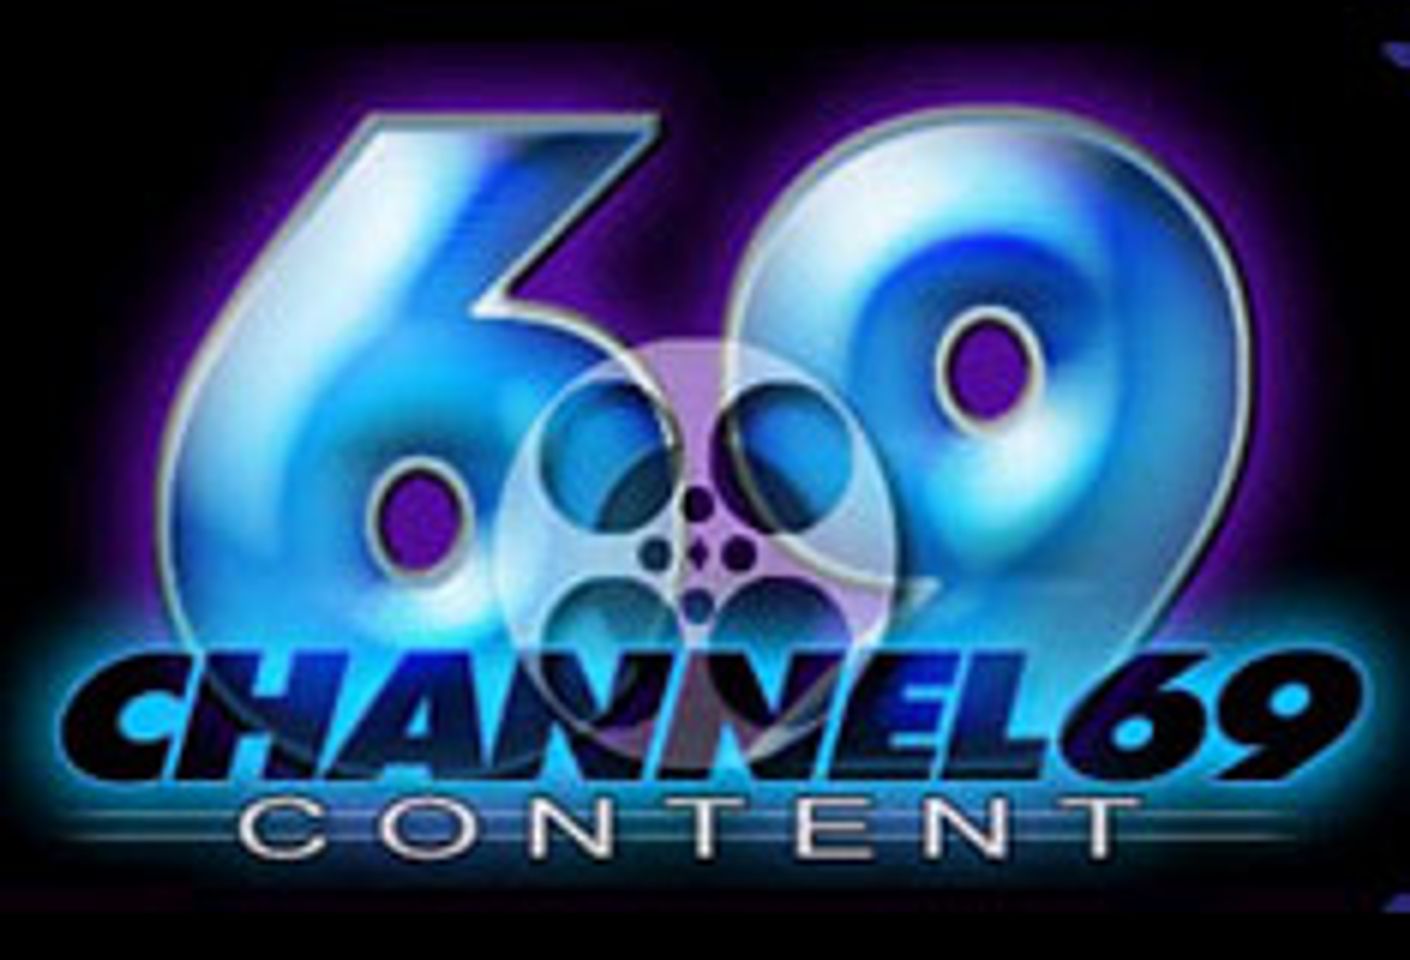 Eight New Streaming Niche Movies: Channel69 Content